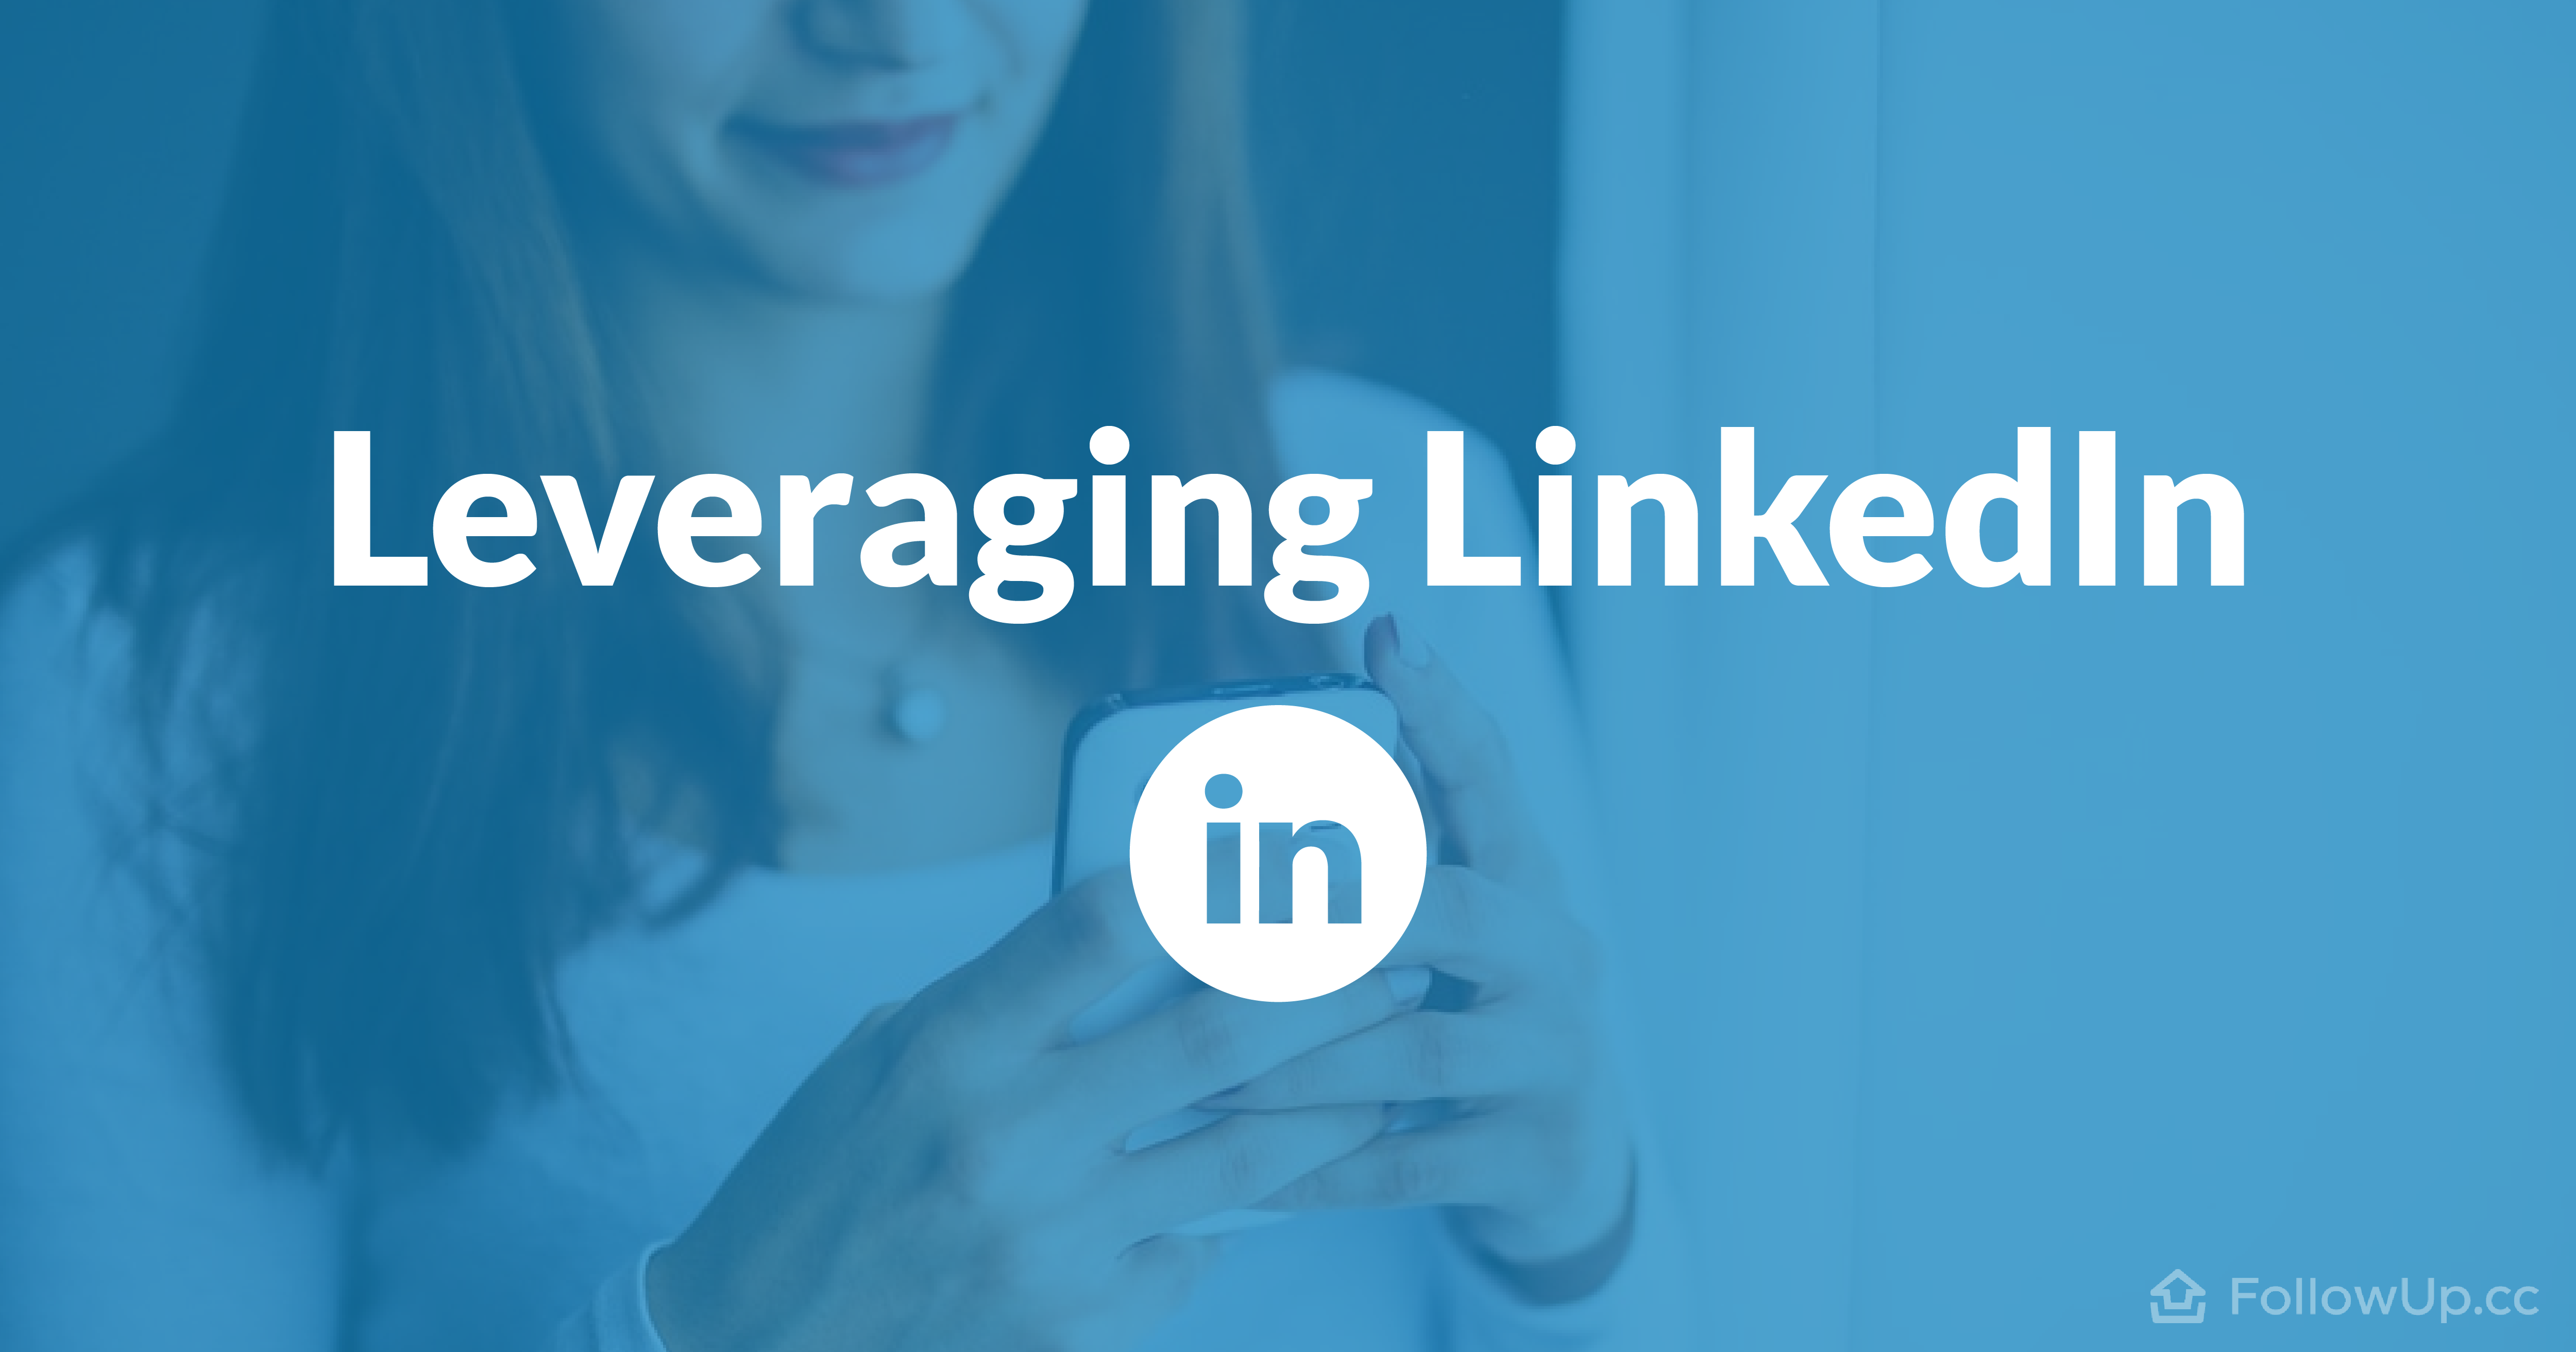 Leveraging LinkedIn Connections